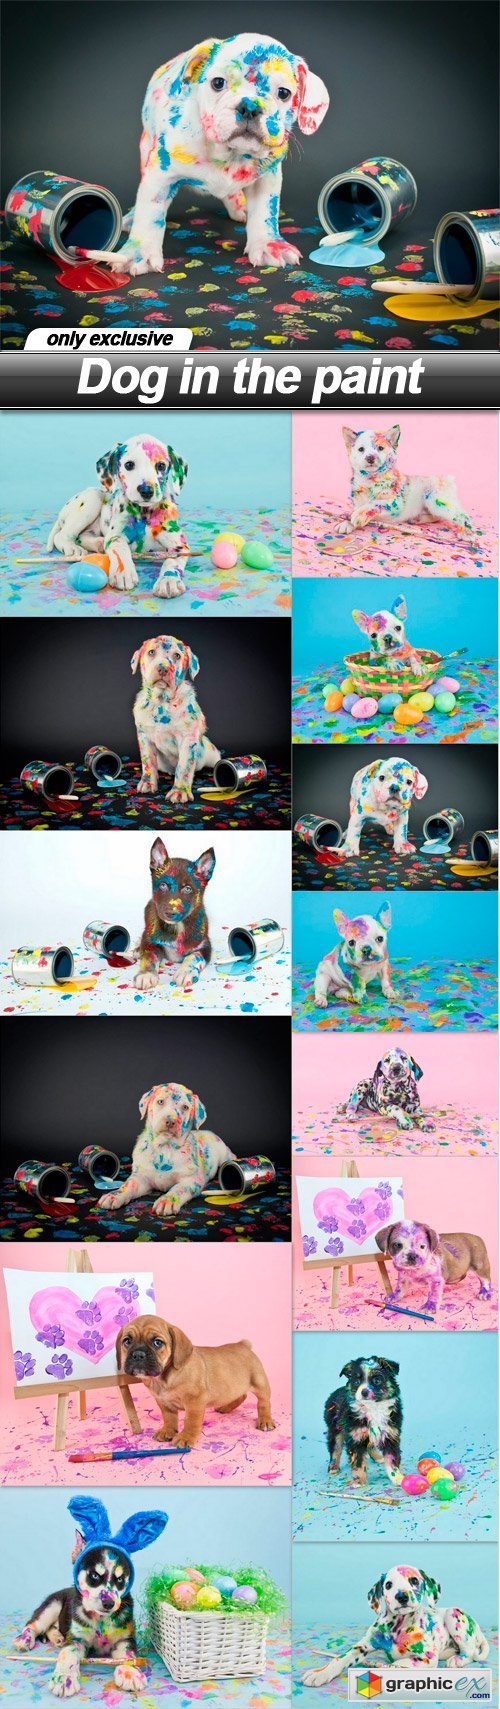 Dog in the paint - 14 UHQ JPEG